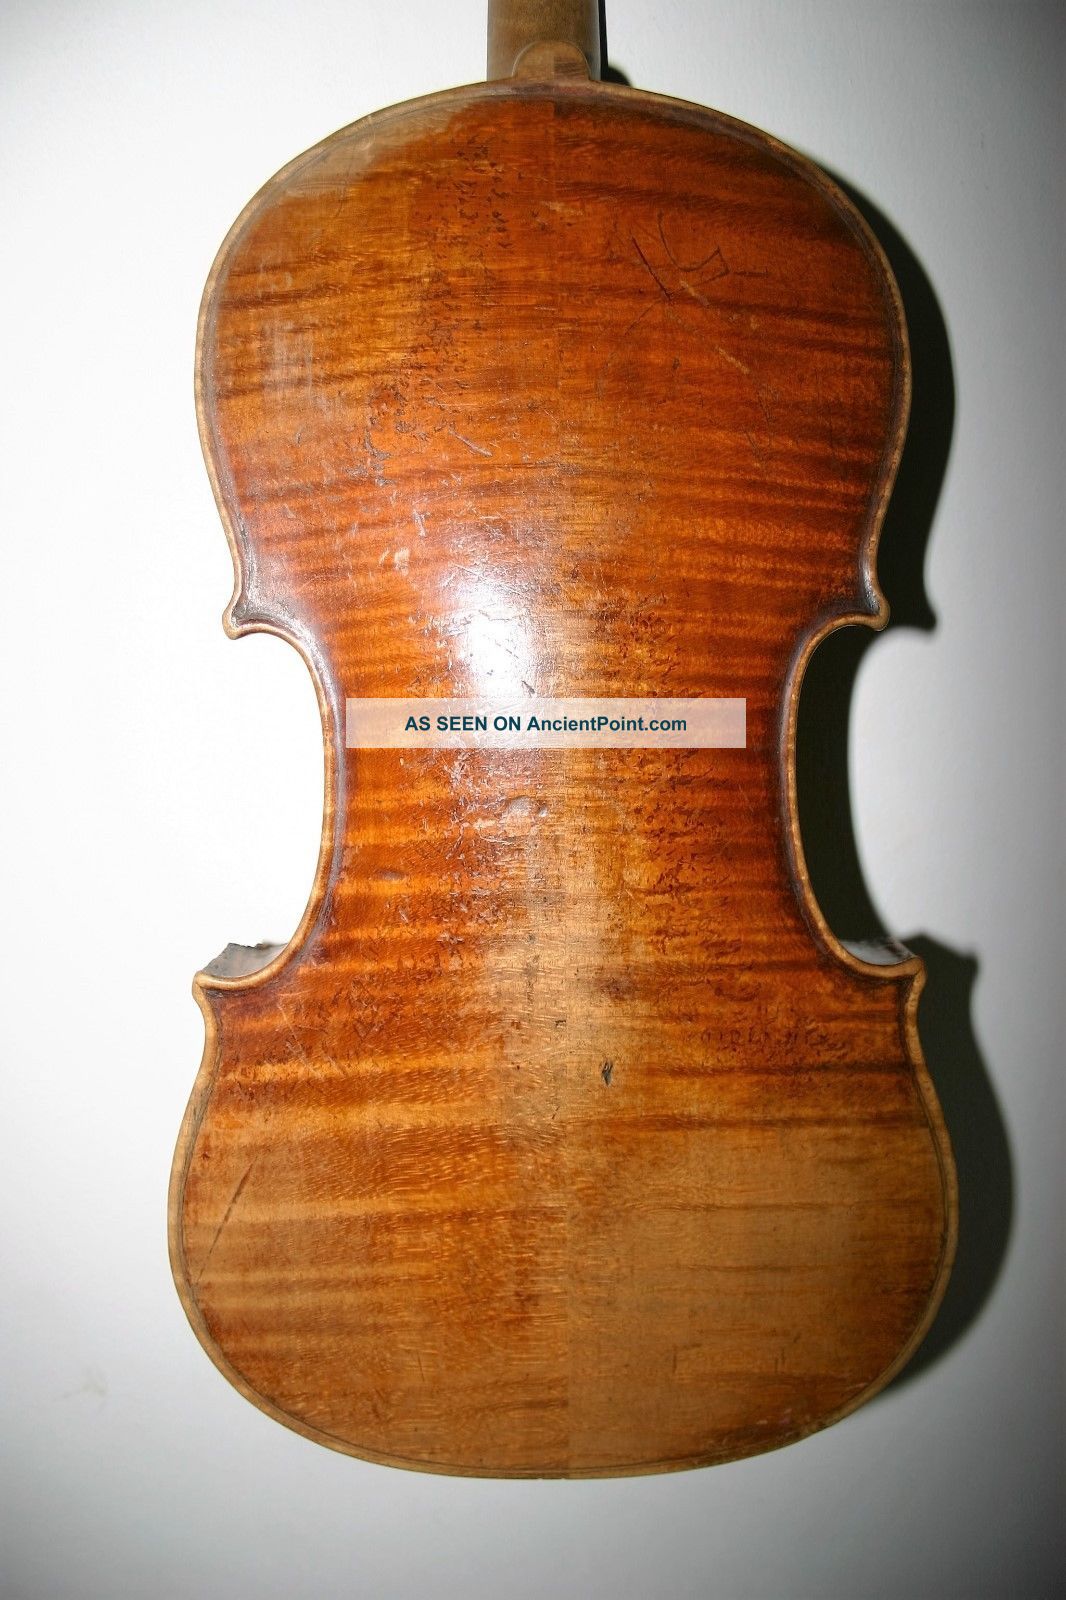 Old Antique Well Played Unlabeled Possibly Italian? Violin Repair Great Project String photo